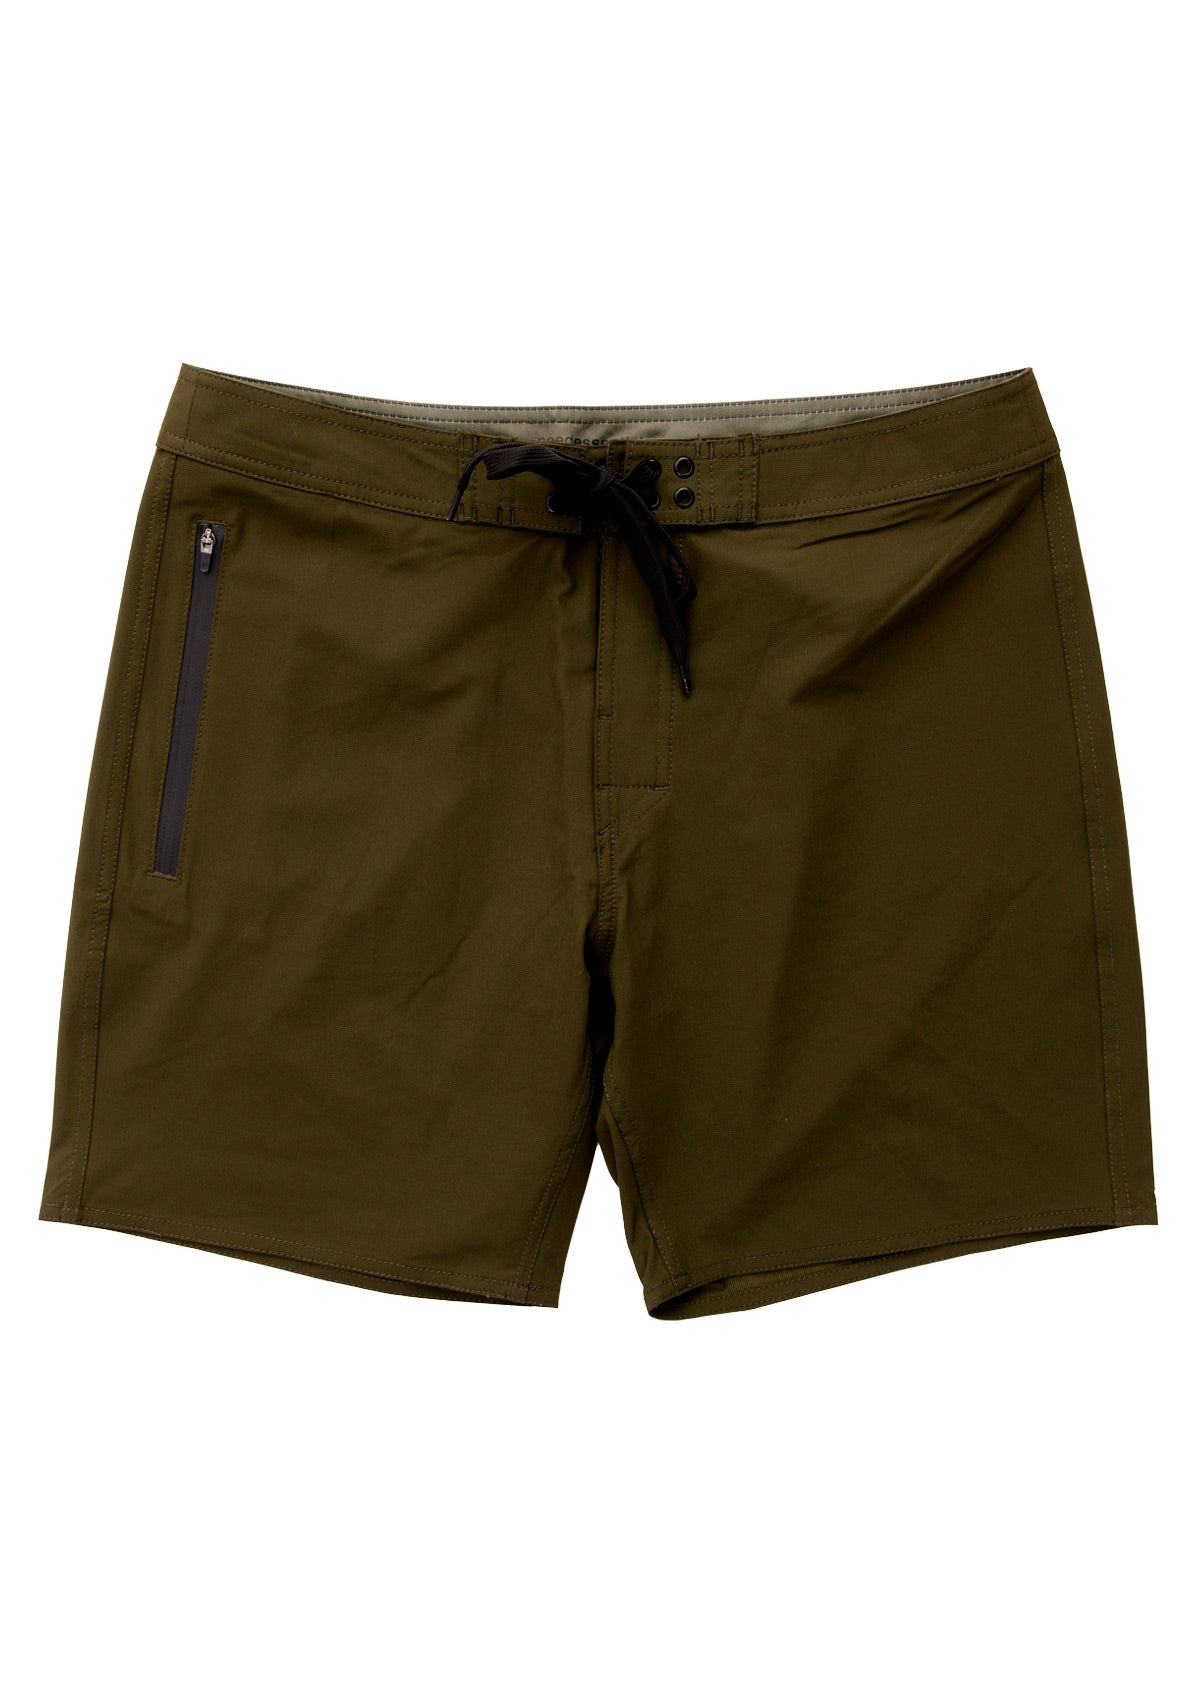 needessentials side mens surfing boardshorts non branded olive 